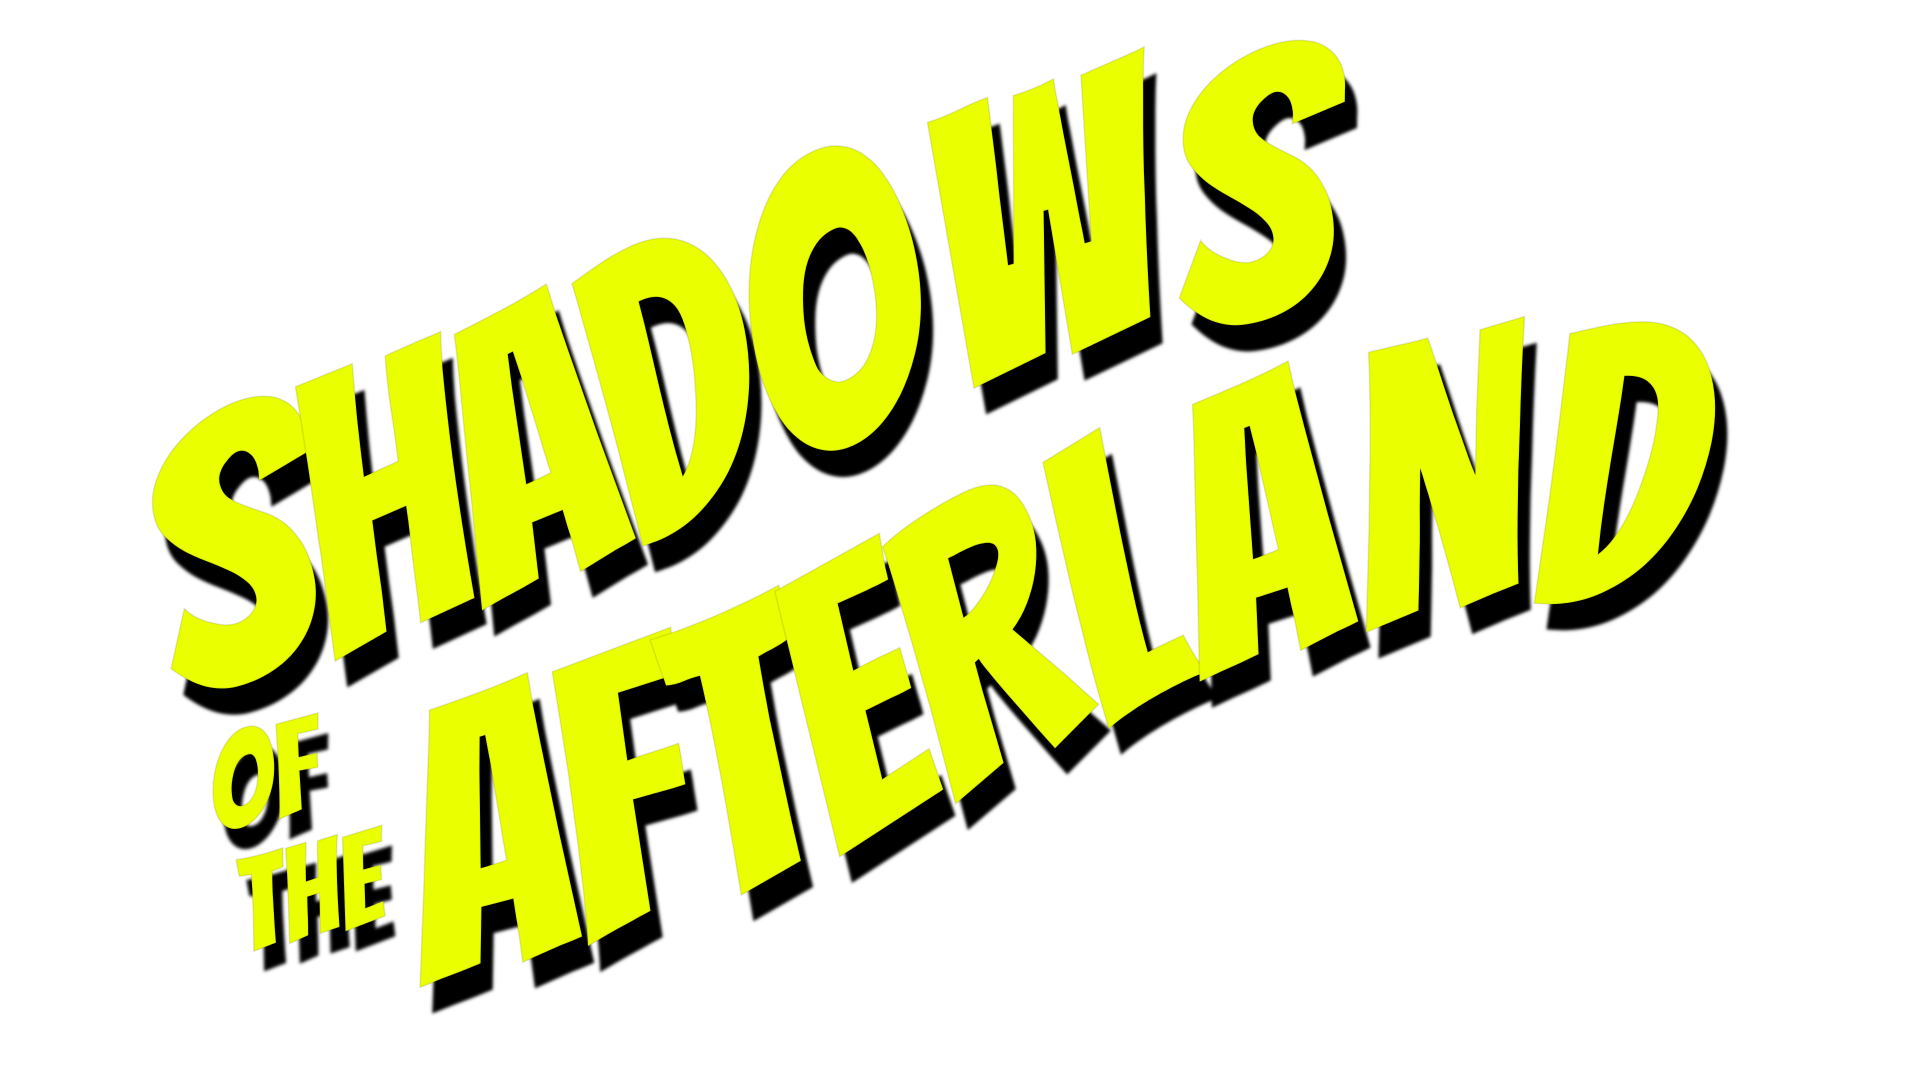 Shadows of the Afterland logo with drop shadow.